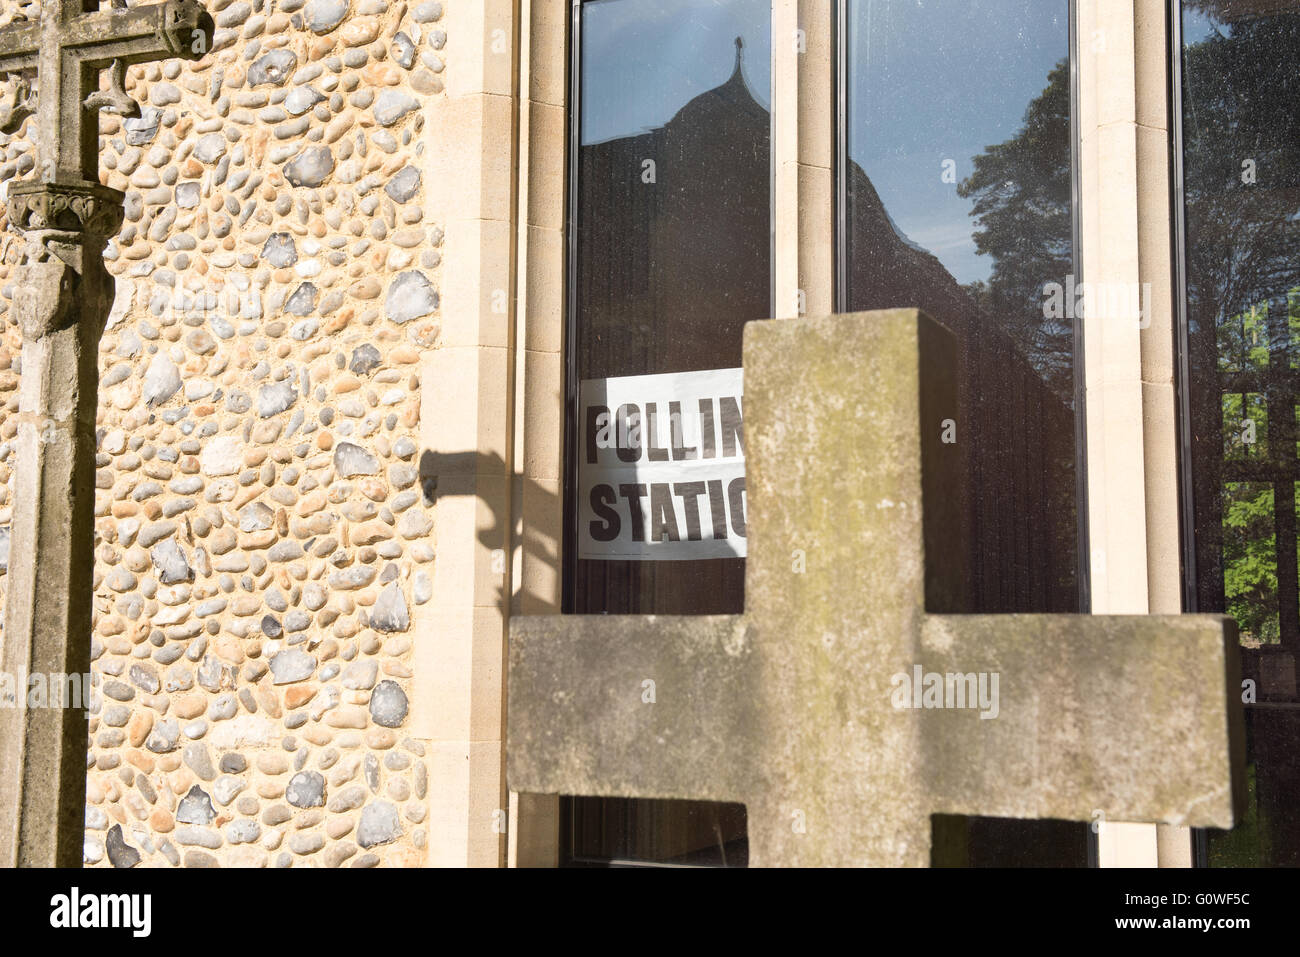 Brentwood, Essex, UK. 5th May, 2016. The polling station at South Weald, Brentwood, Essex is accessed via the graveyard of St Peters’ Church Credit:  Ian Davidson/Alamy Live News Stock Photo